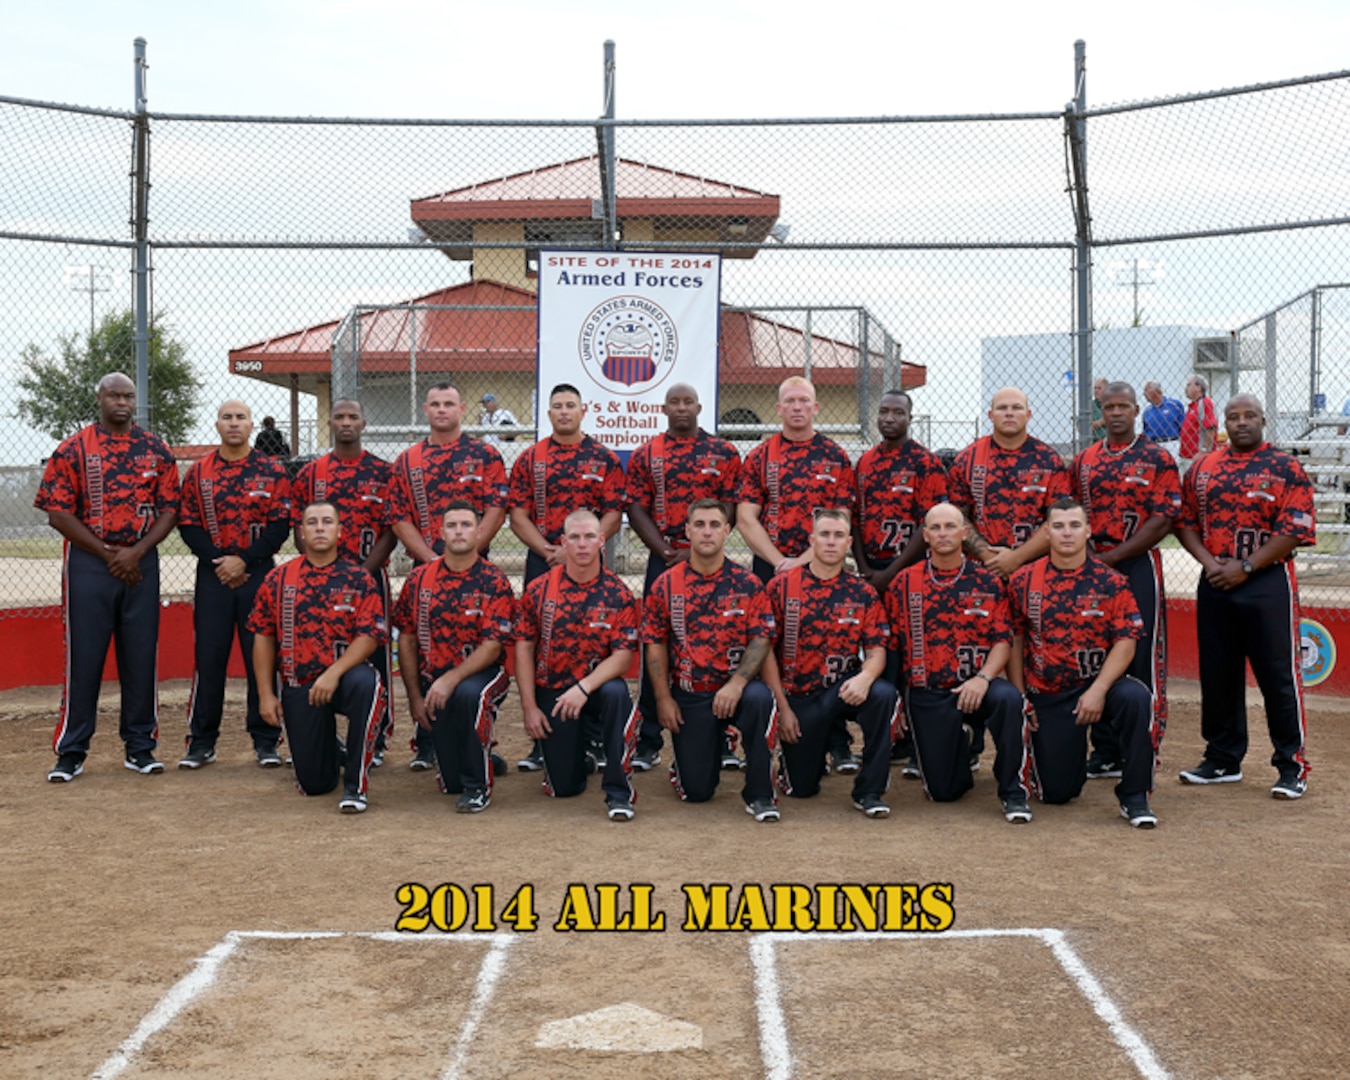 All Marine Mens Softball Team at the 2014 Armed Forces Softball Championship at Fort Sill, Okla. 14-19 September.